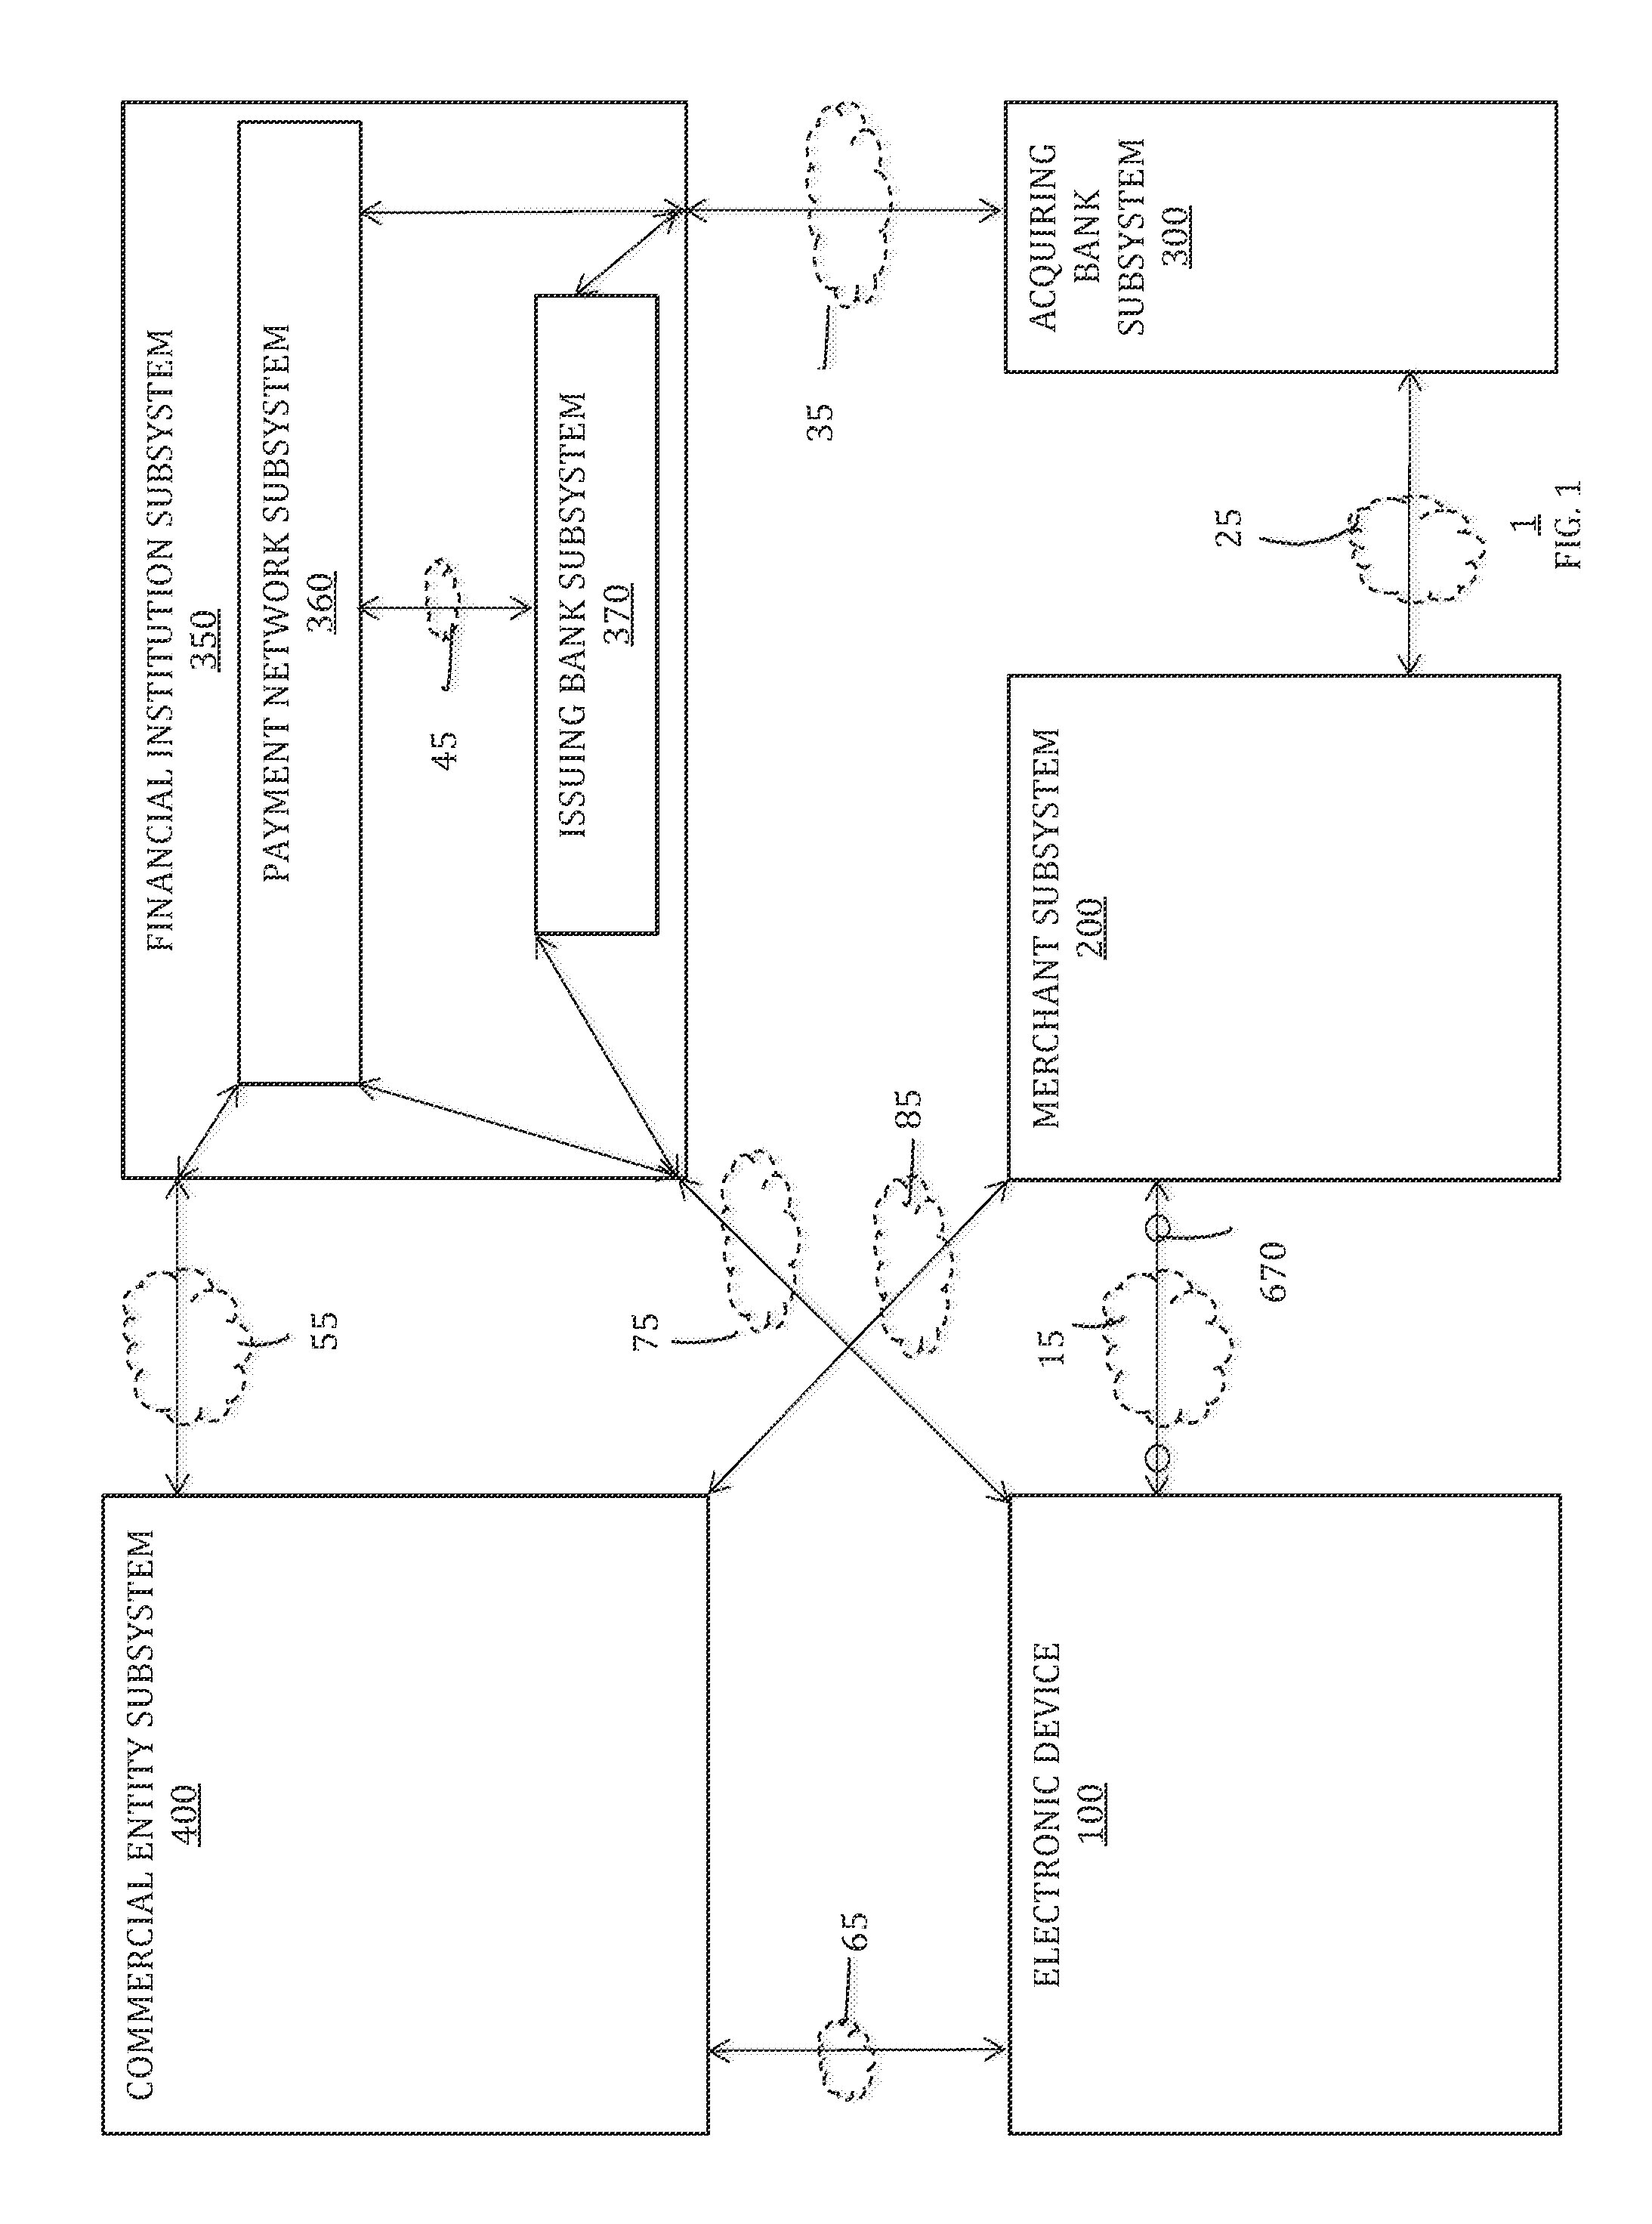 Online payments using a secure element of an electronic device